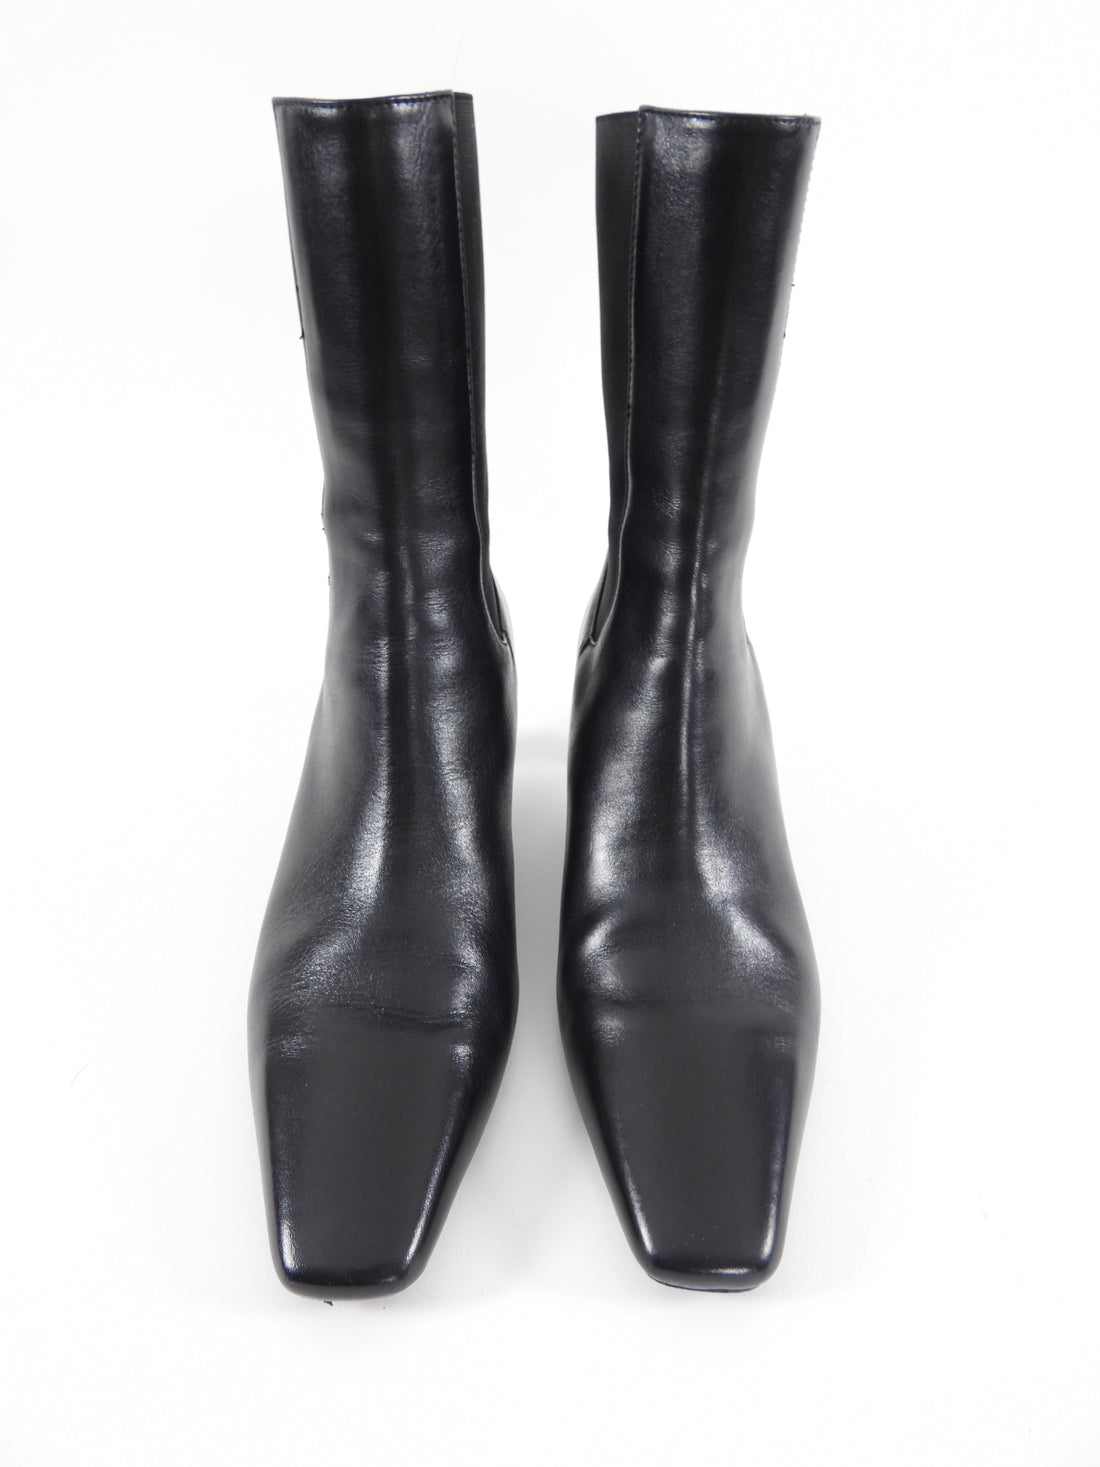 Toteme The Mid-Heel Black Leather Boots - 37